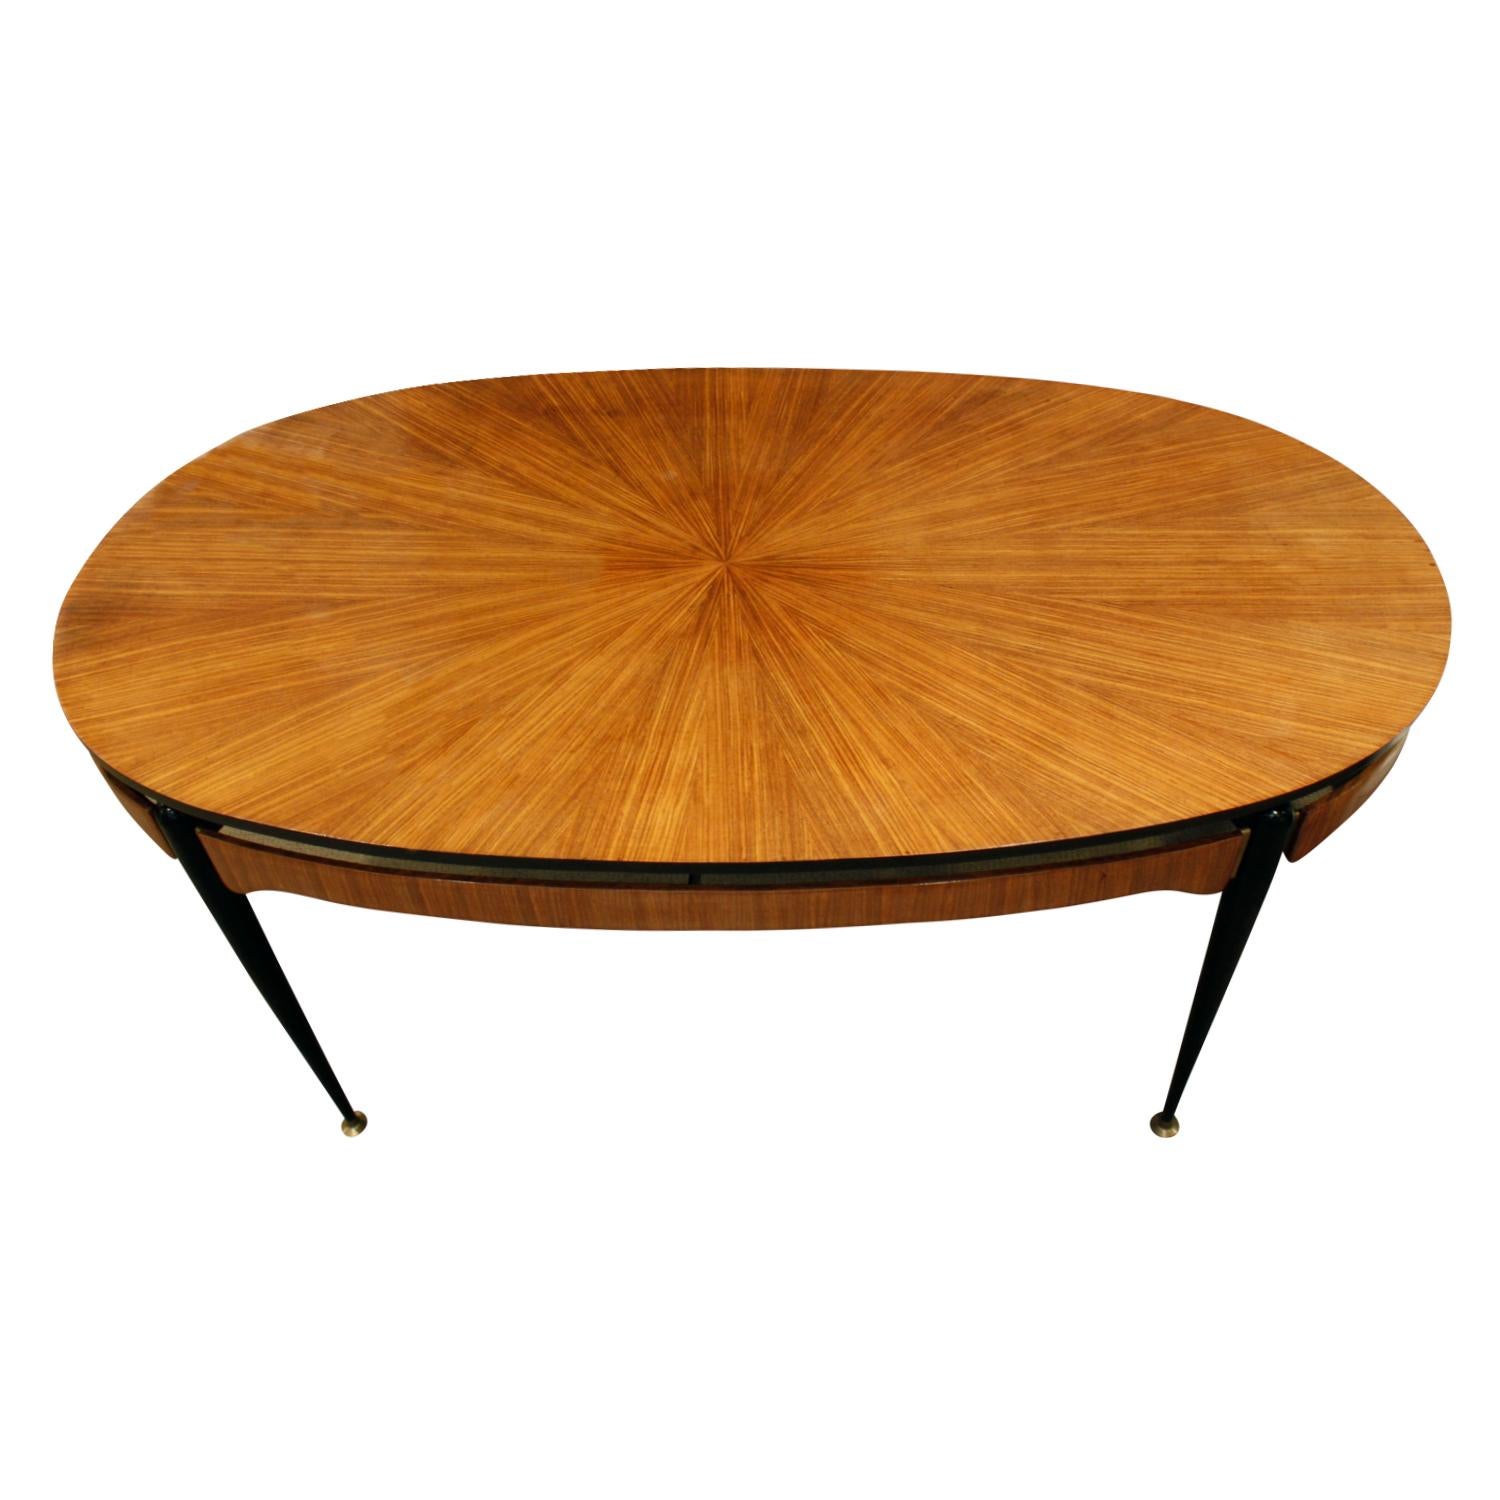 Racetrack dining table with radiating rosewood top and metal base attributed to Ico Parisi, Italy, circa 1954.